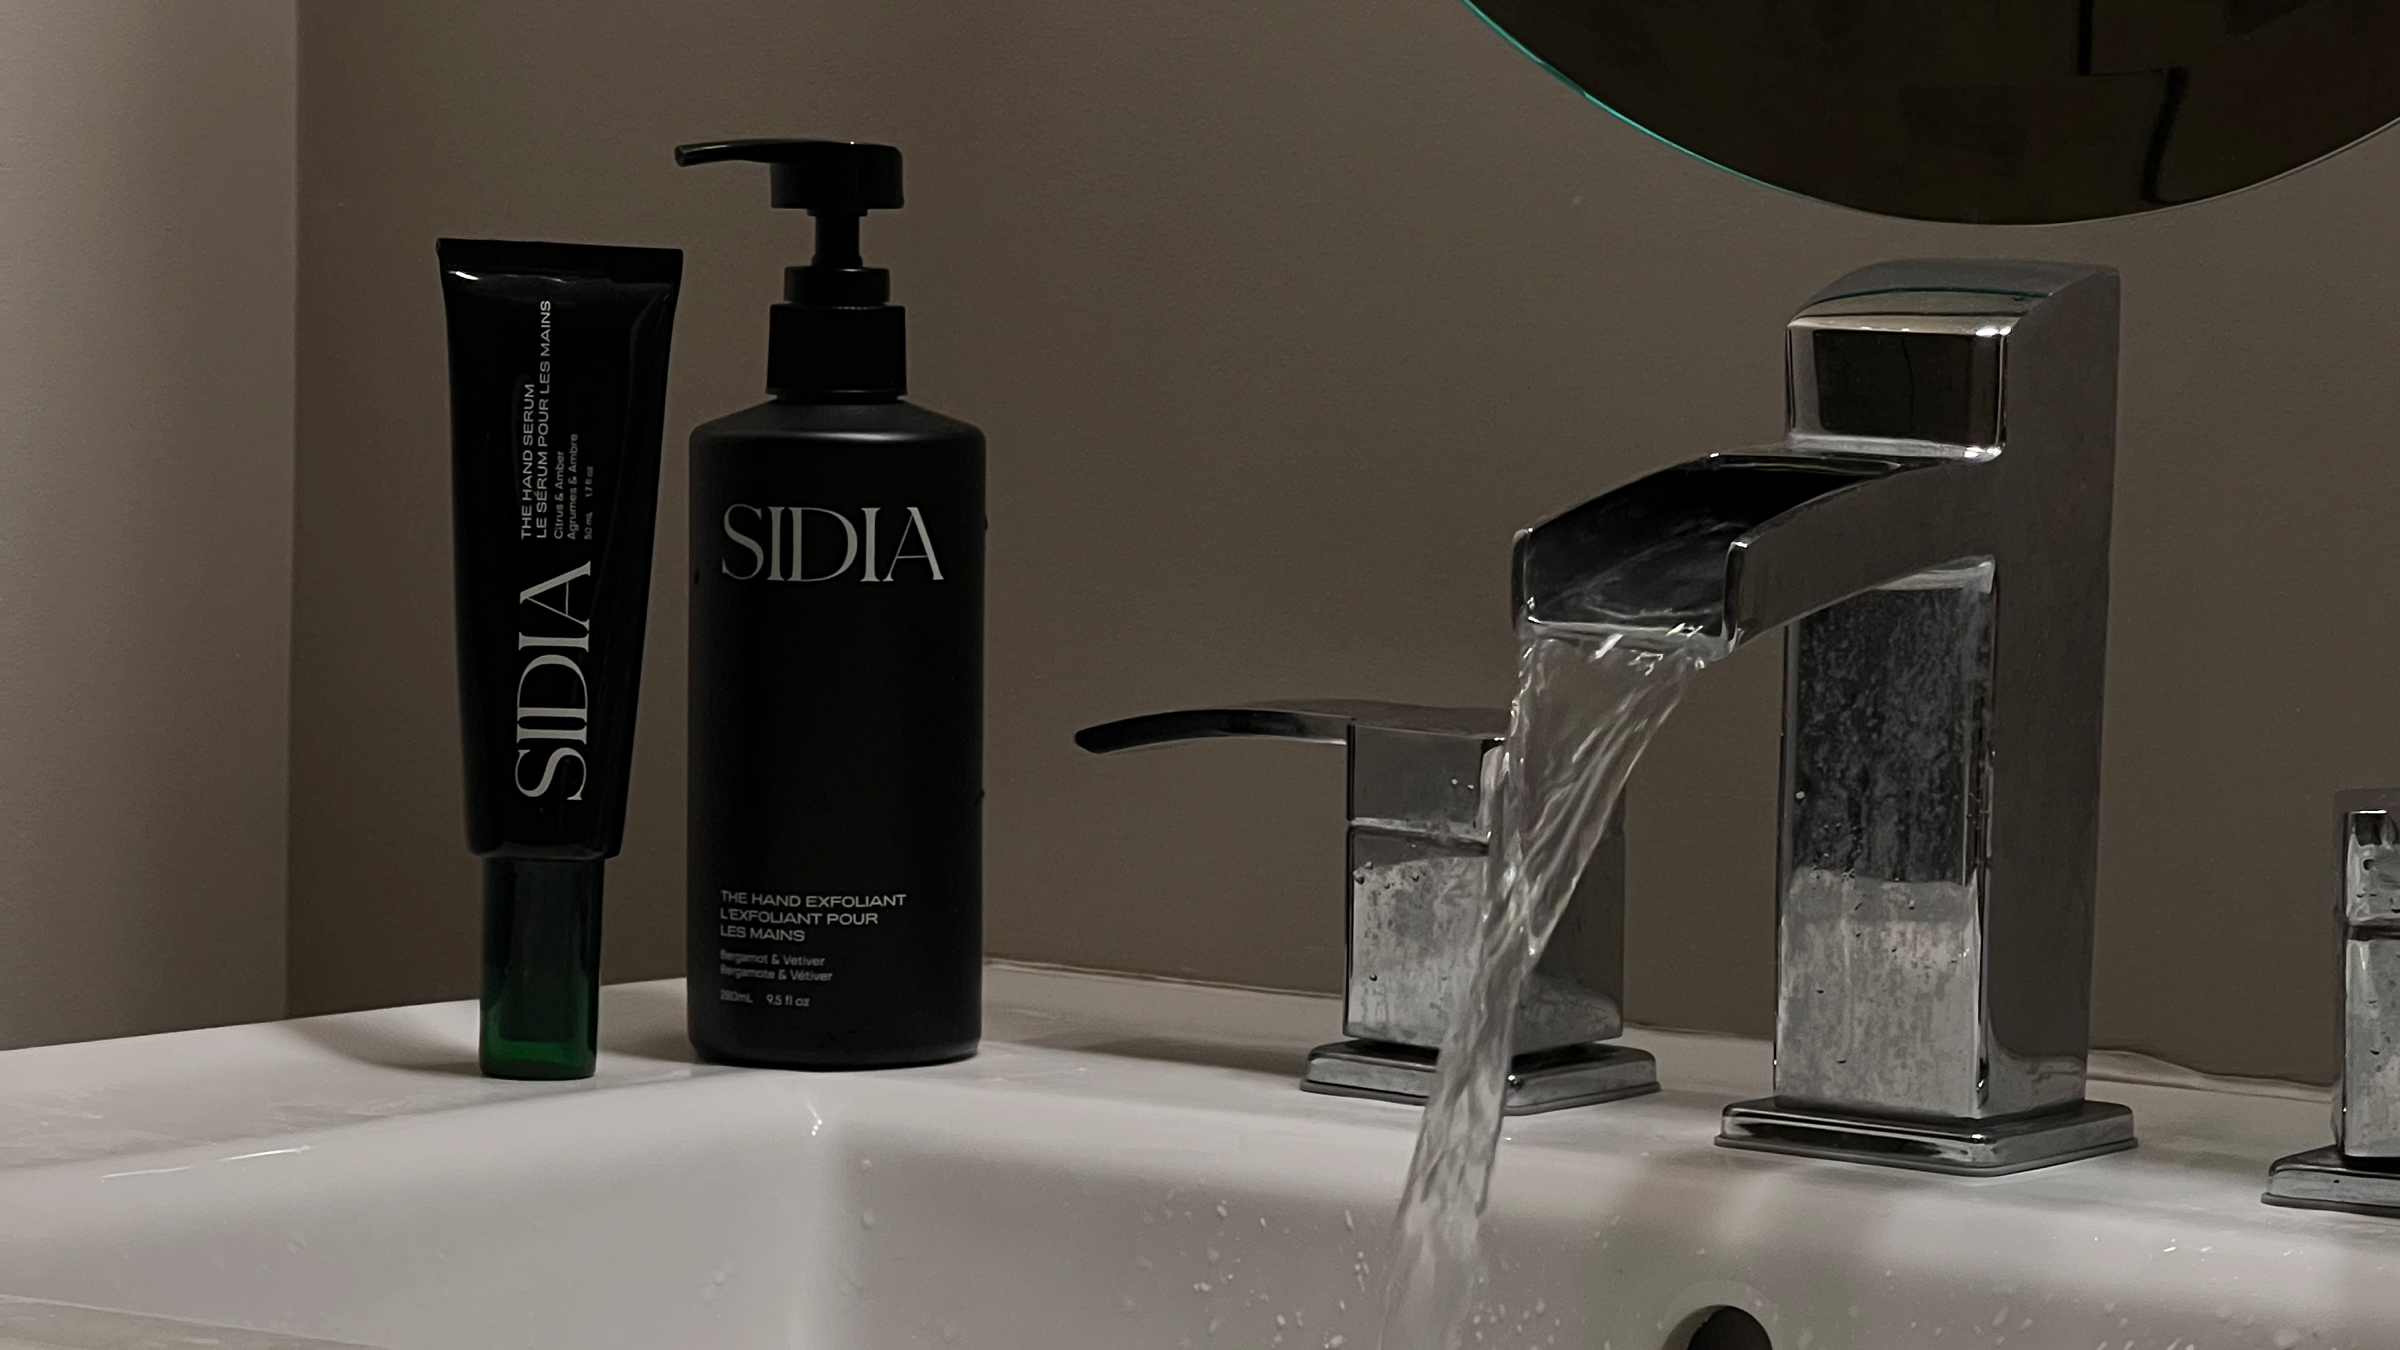 Vibing with SIDIA: Self-Attuned Wellness That Begins in the Home